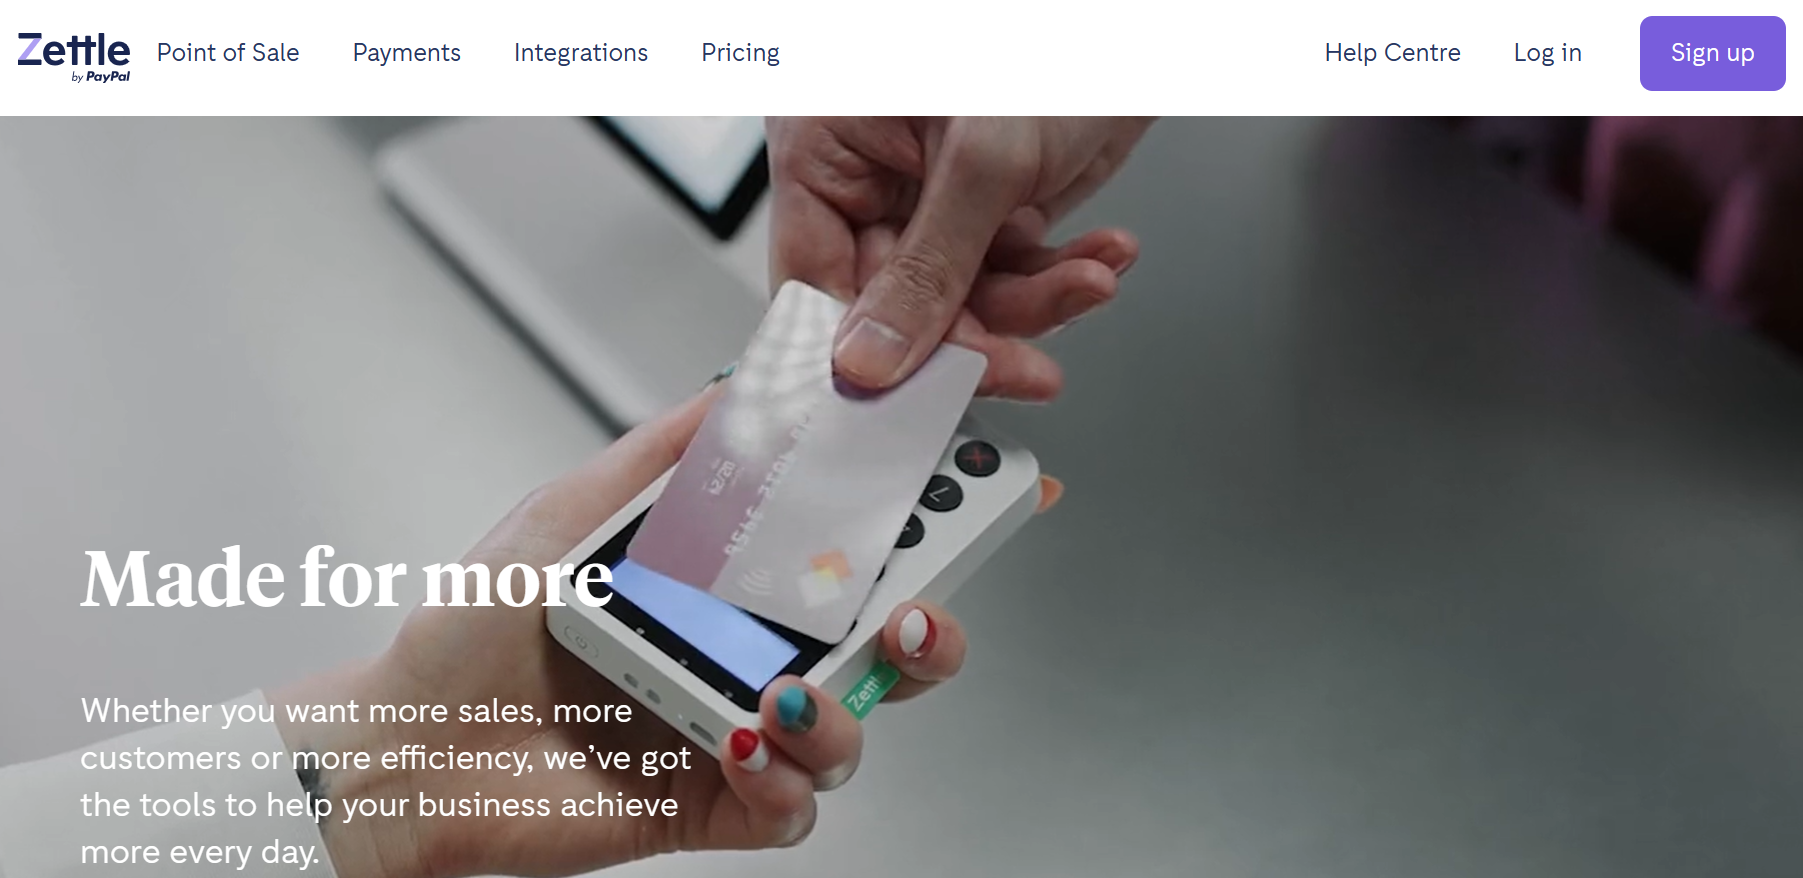 Zettle: Simplifying Mobile Payment Processing for Small Businesses